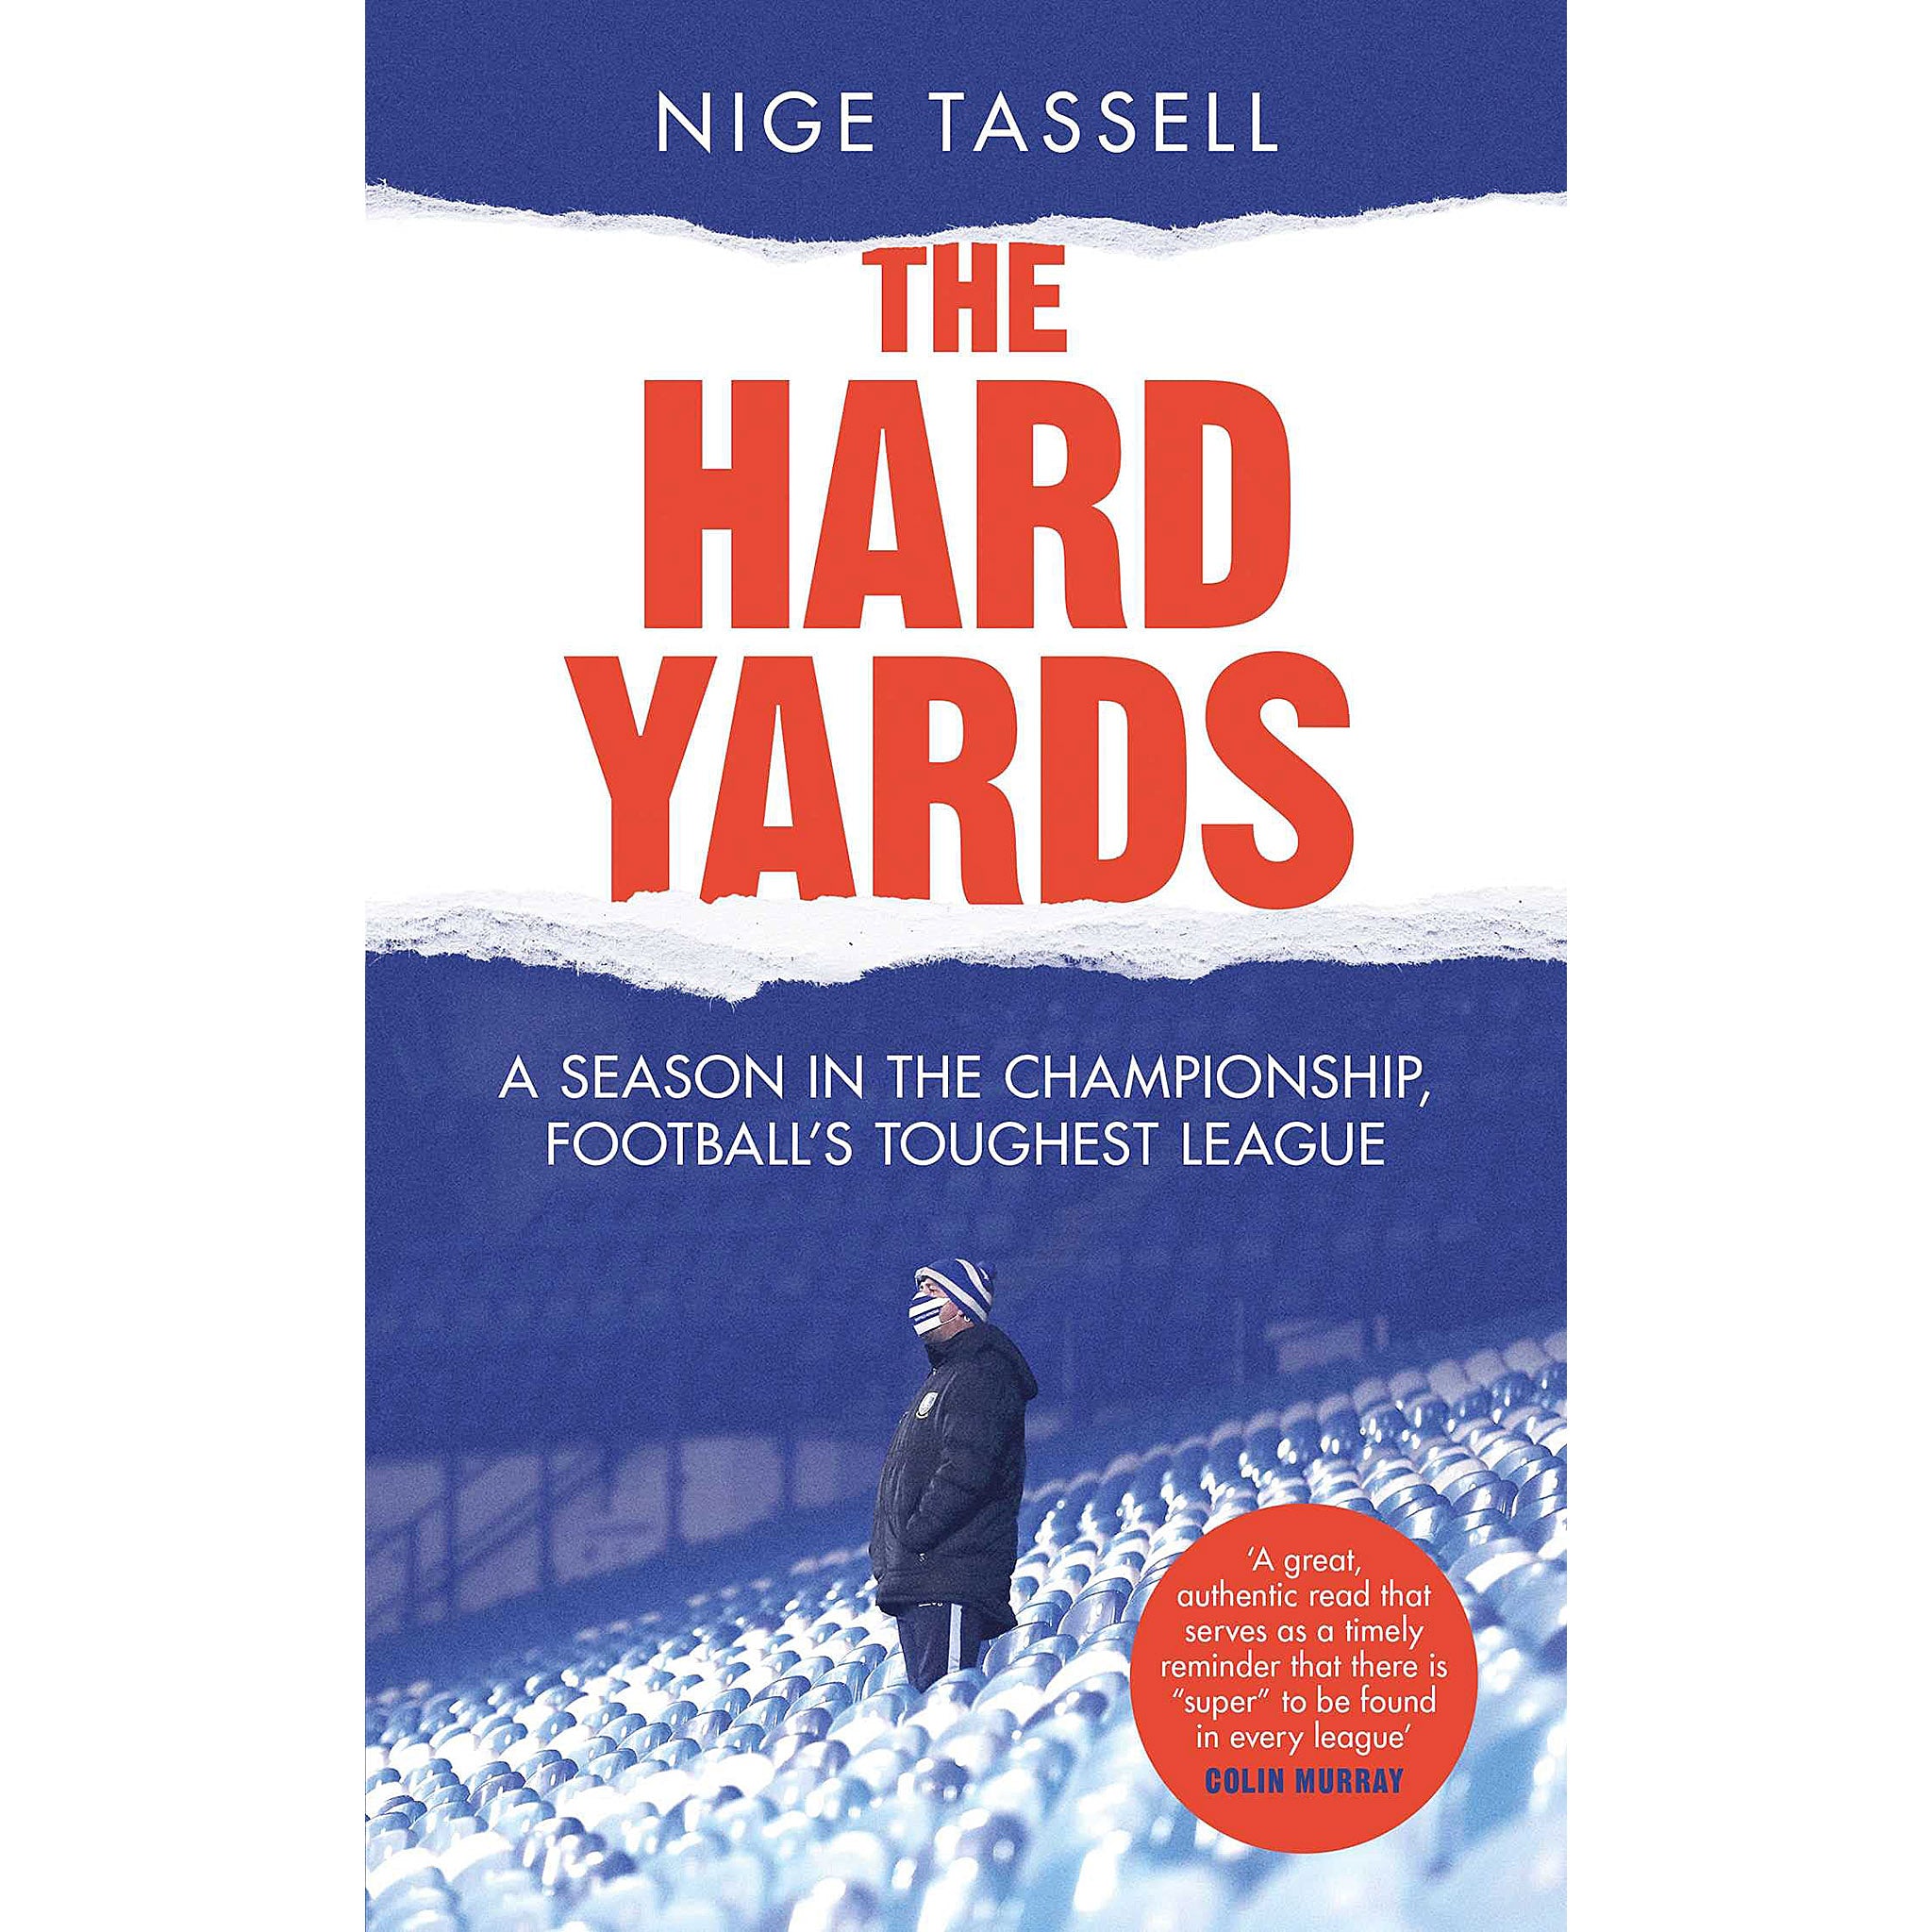 The Hard Yards – A Season in the Championship, Football's Toughest League